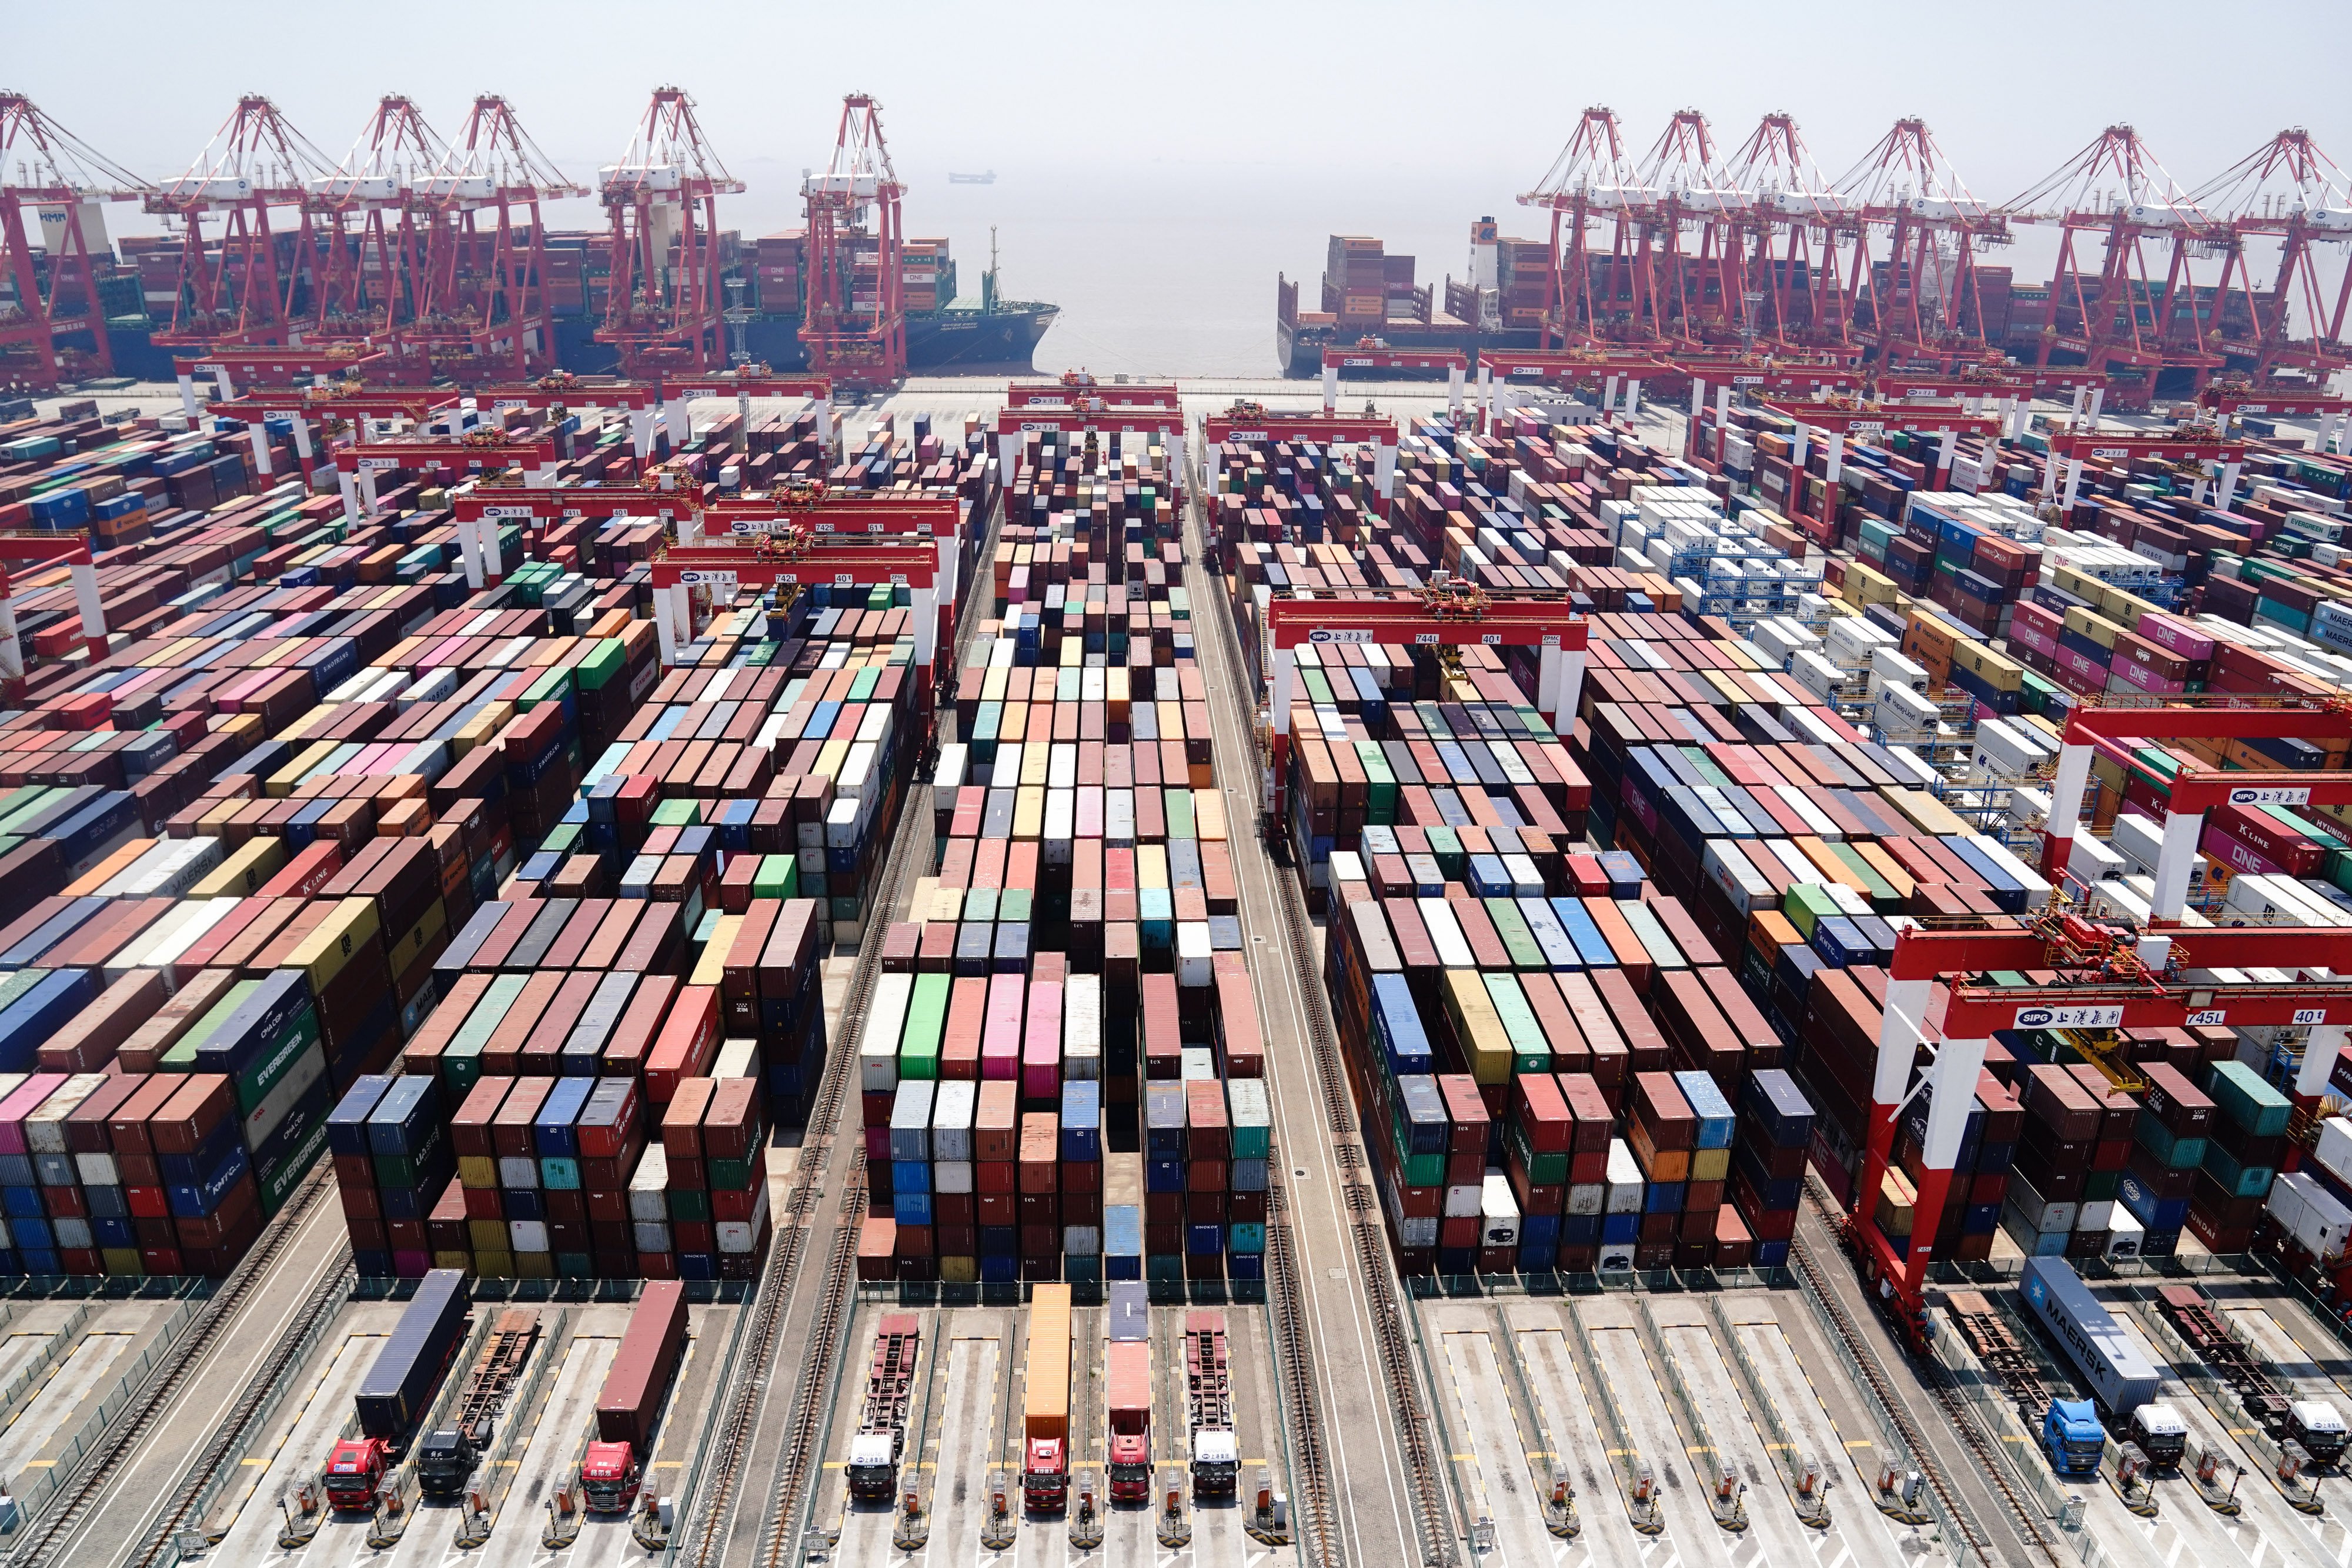 Global supply chains stemming from the Shanghai Yangshan Deep Water Port were disrupted by weeks of lockdowns earlier this year. Photo: Xinhua